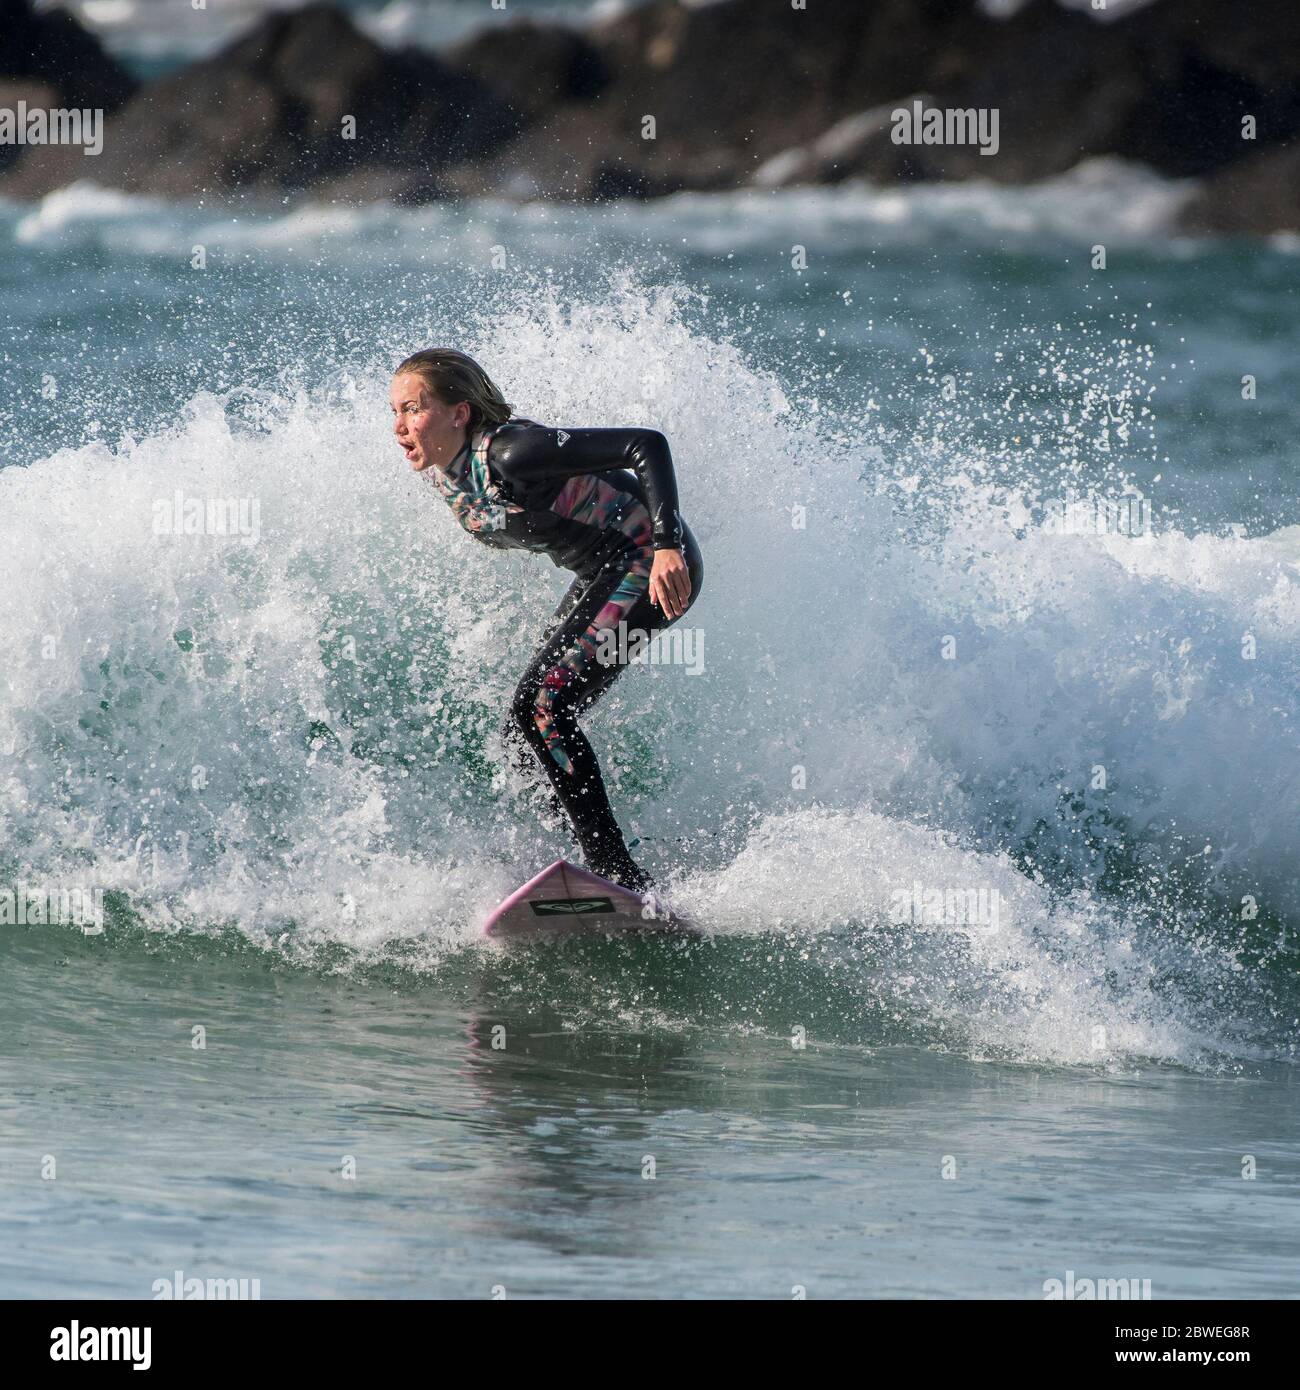 Spectacular surfing action as a young female surfer rides a wave at Fistral in Newquay in Cornwall. Stock Photo